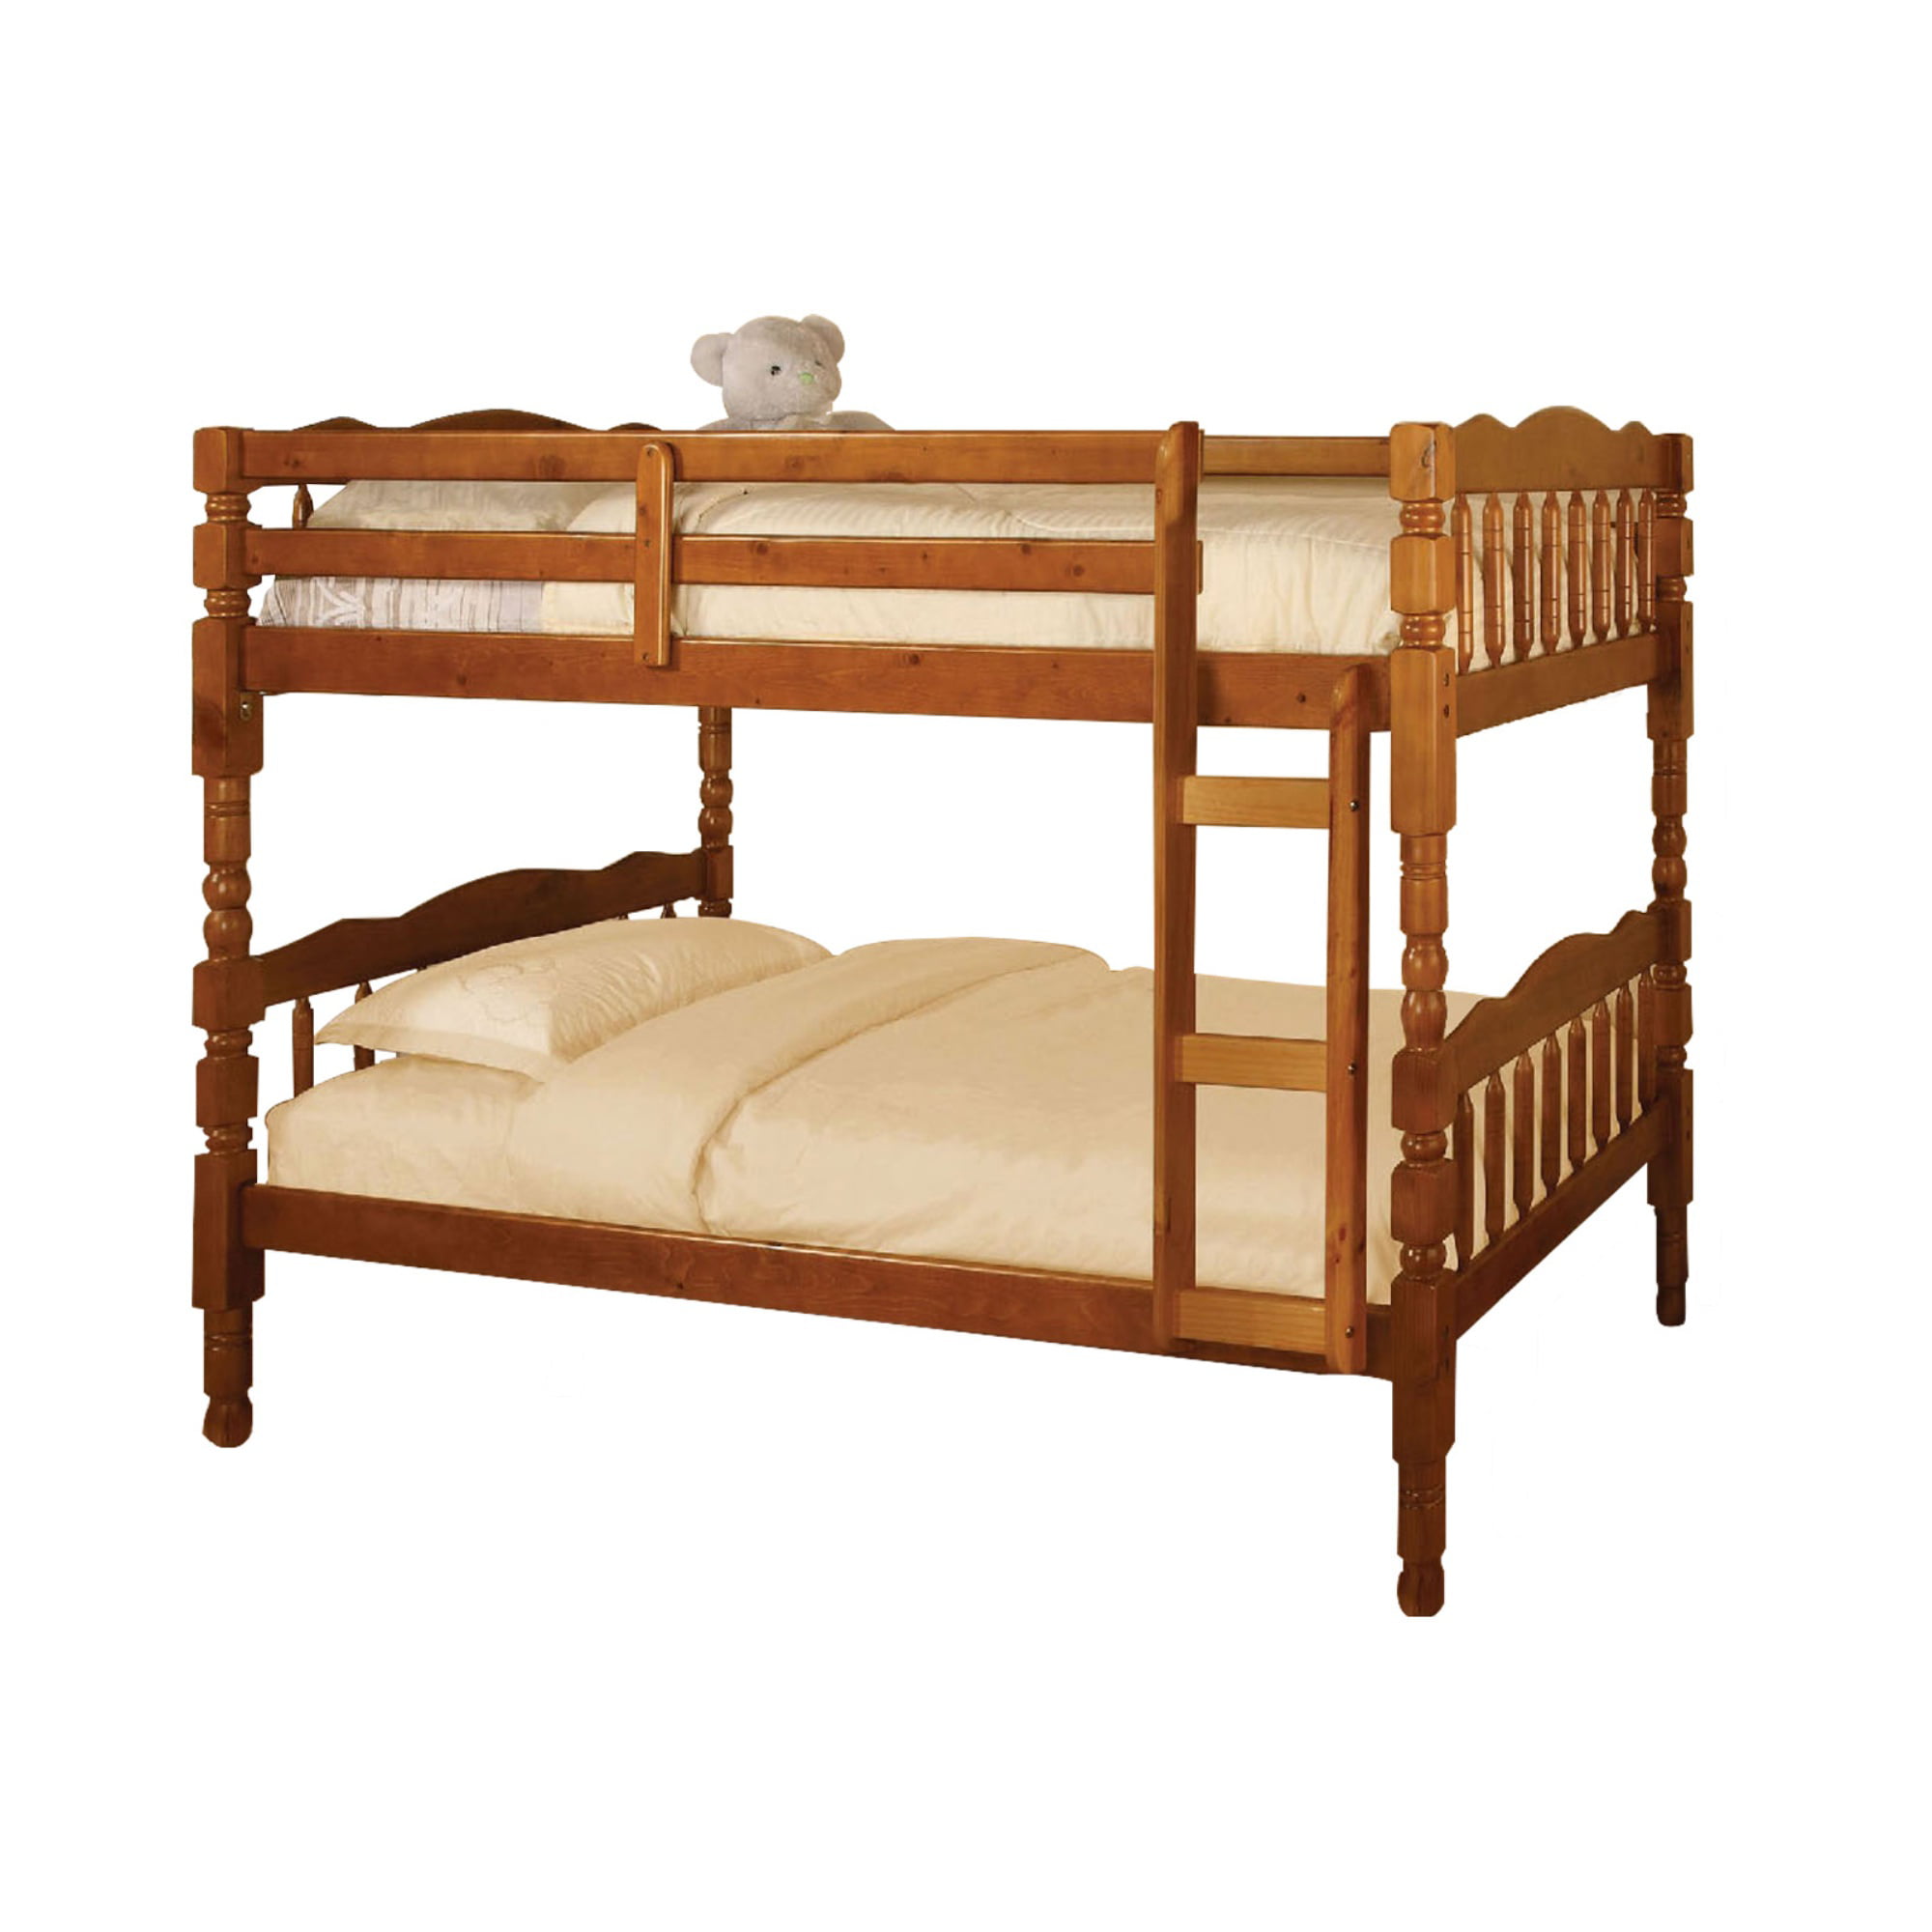 American Woodcrafters Provo Twin Over, American Woodcrafters Bunk Beds